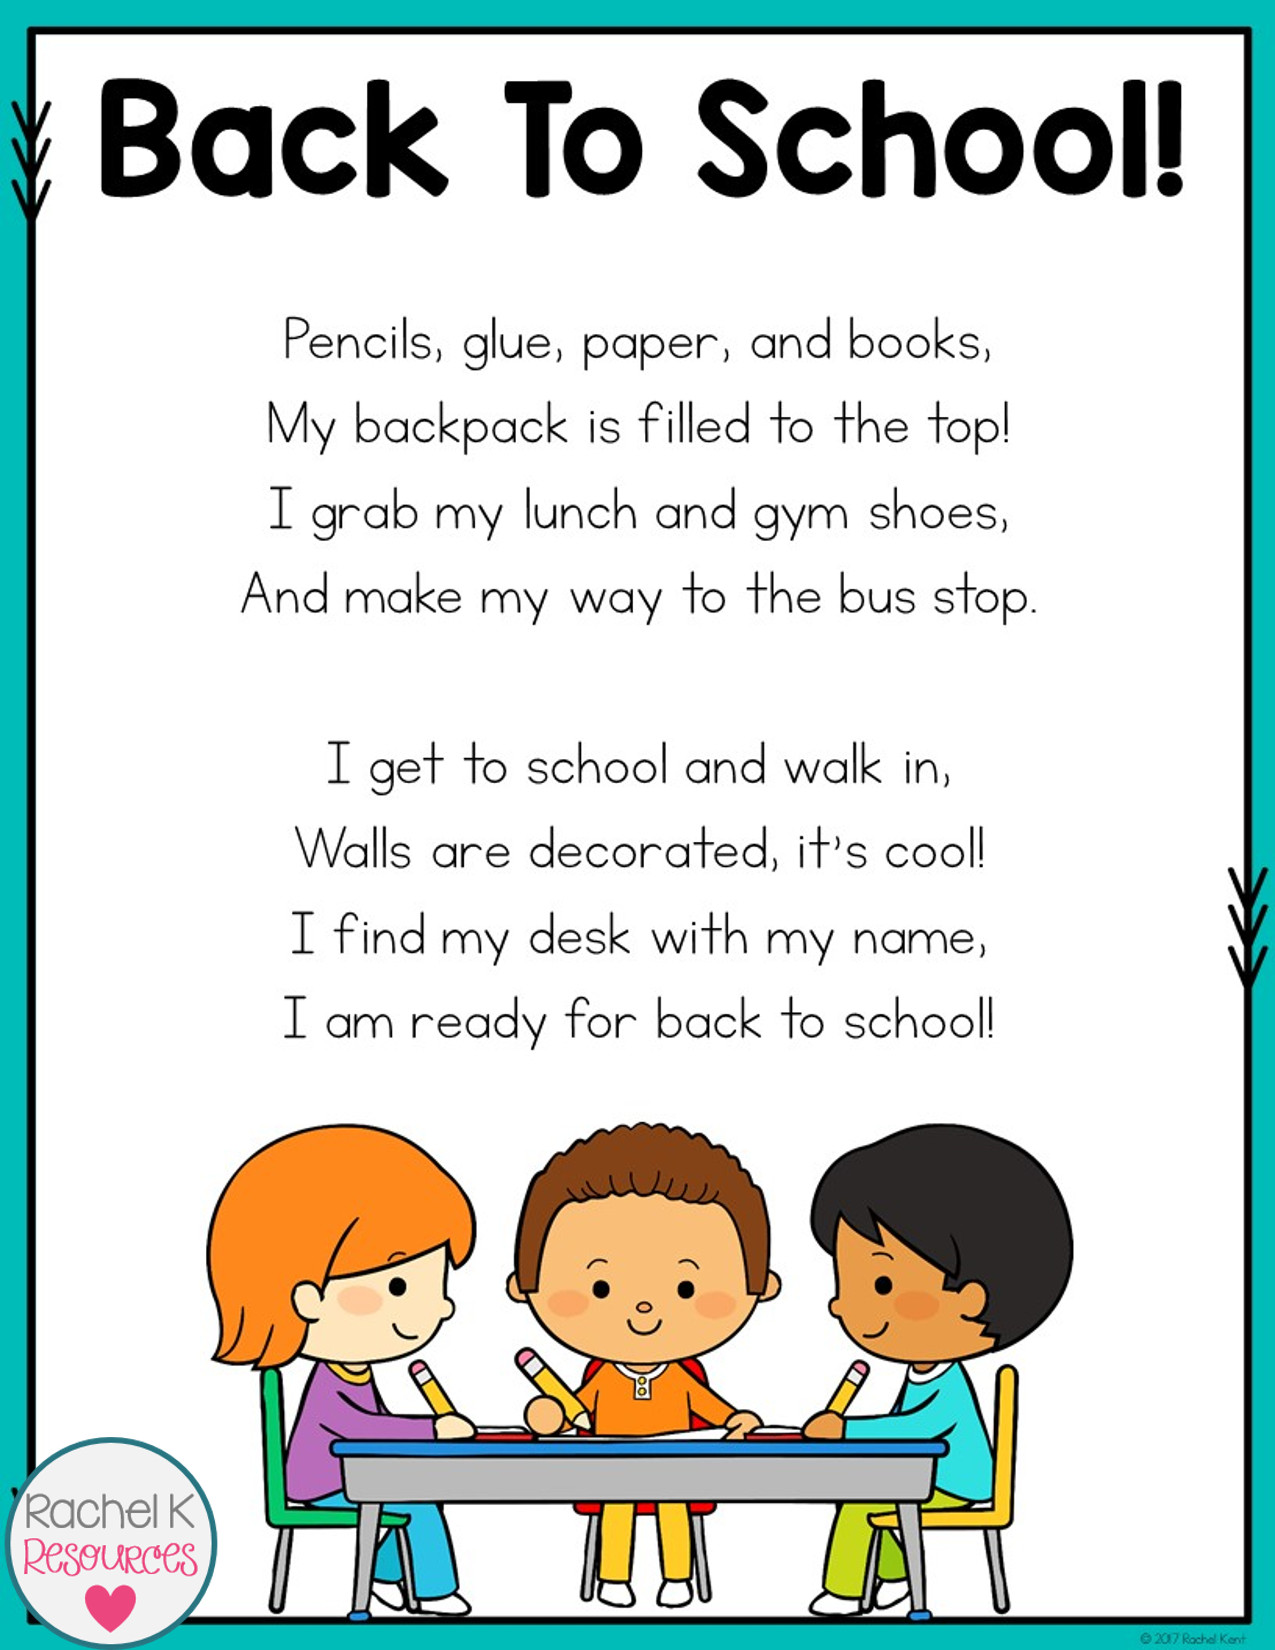 Back To School Poem
 Enjoy reading this FREE poem in the back to school season